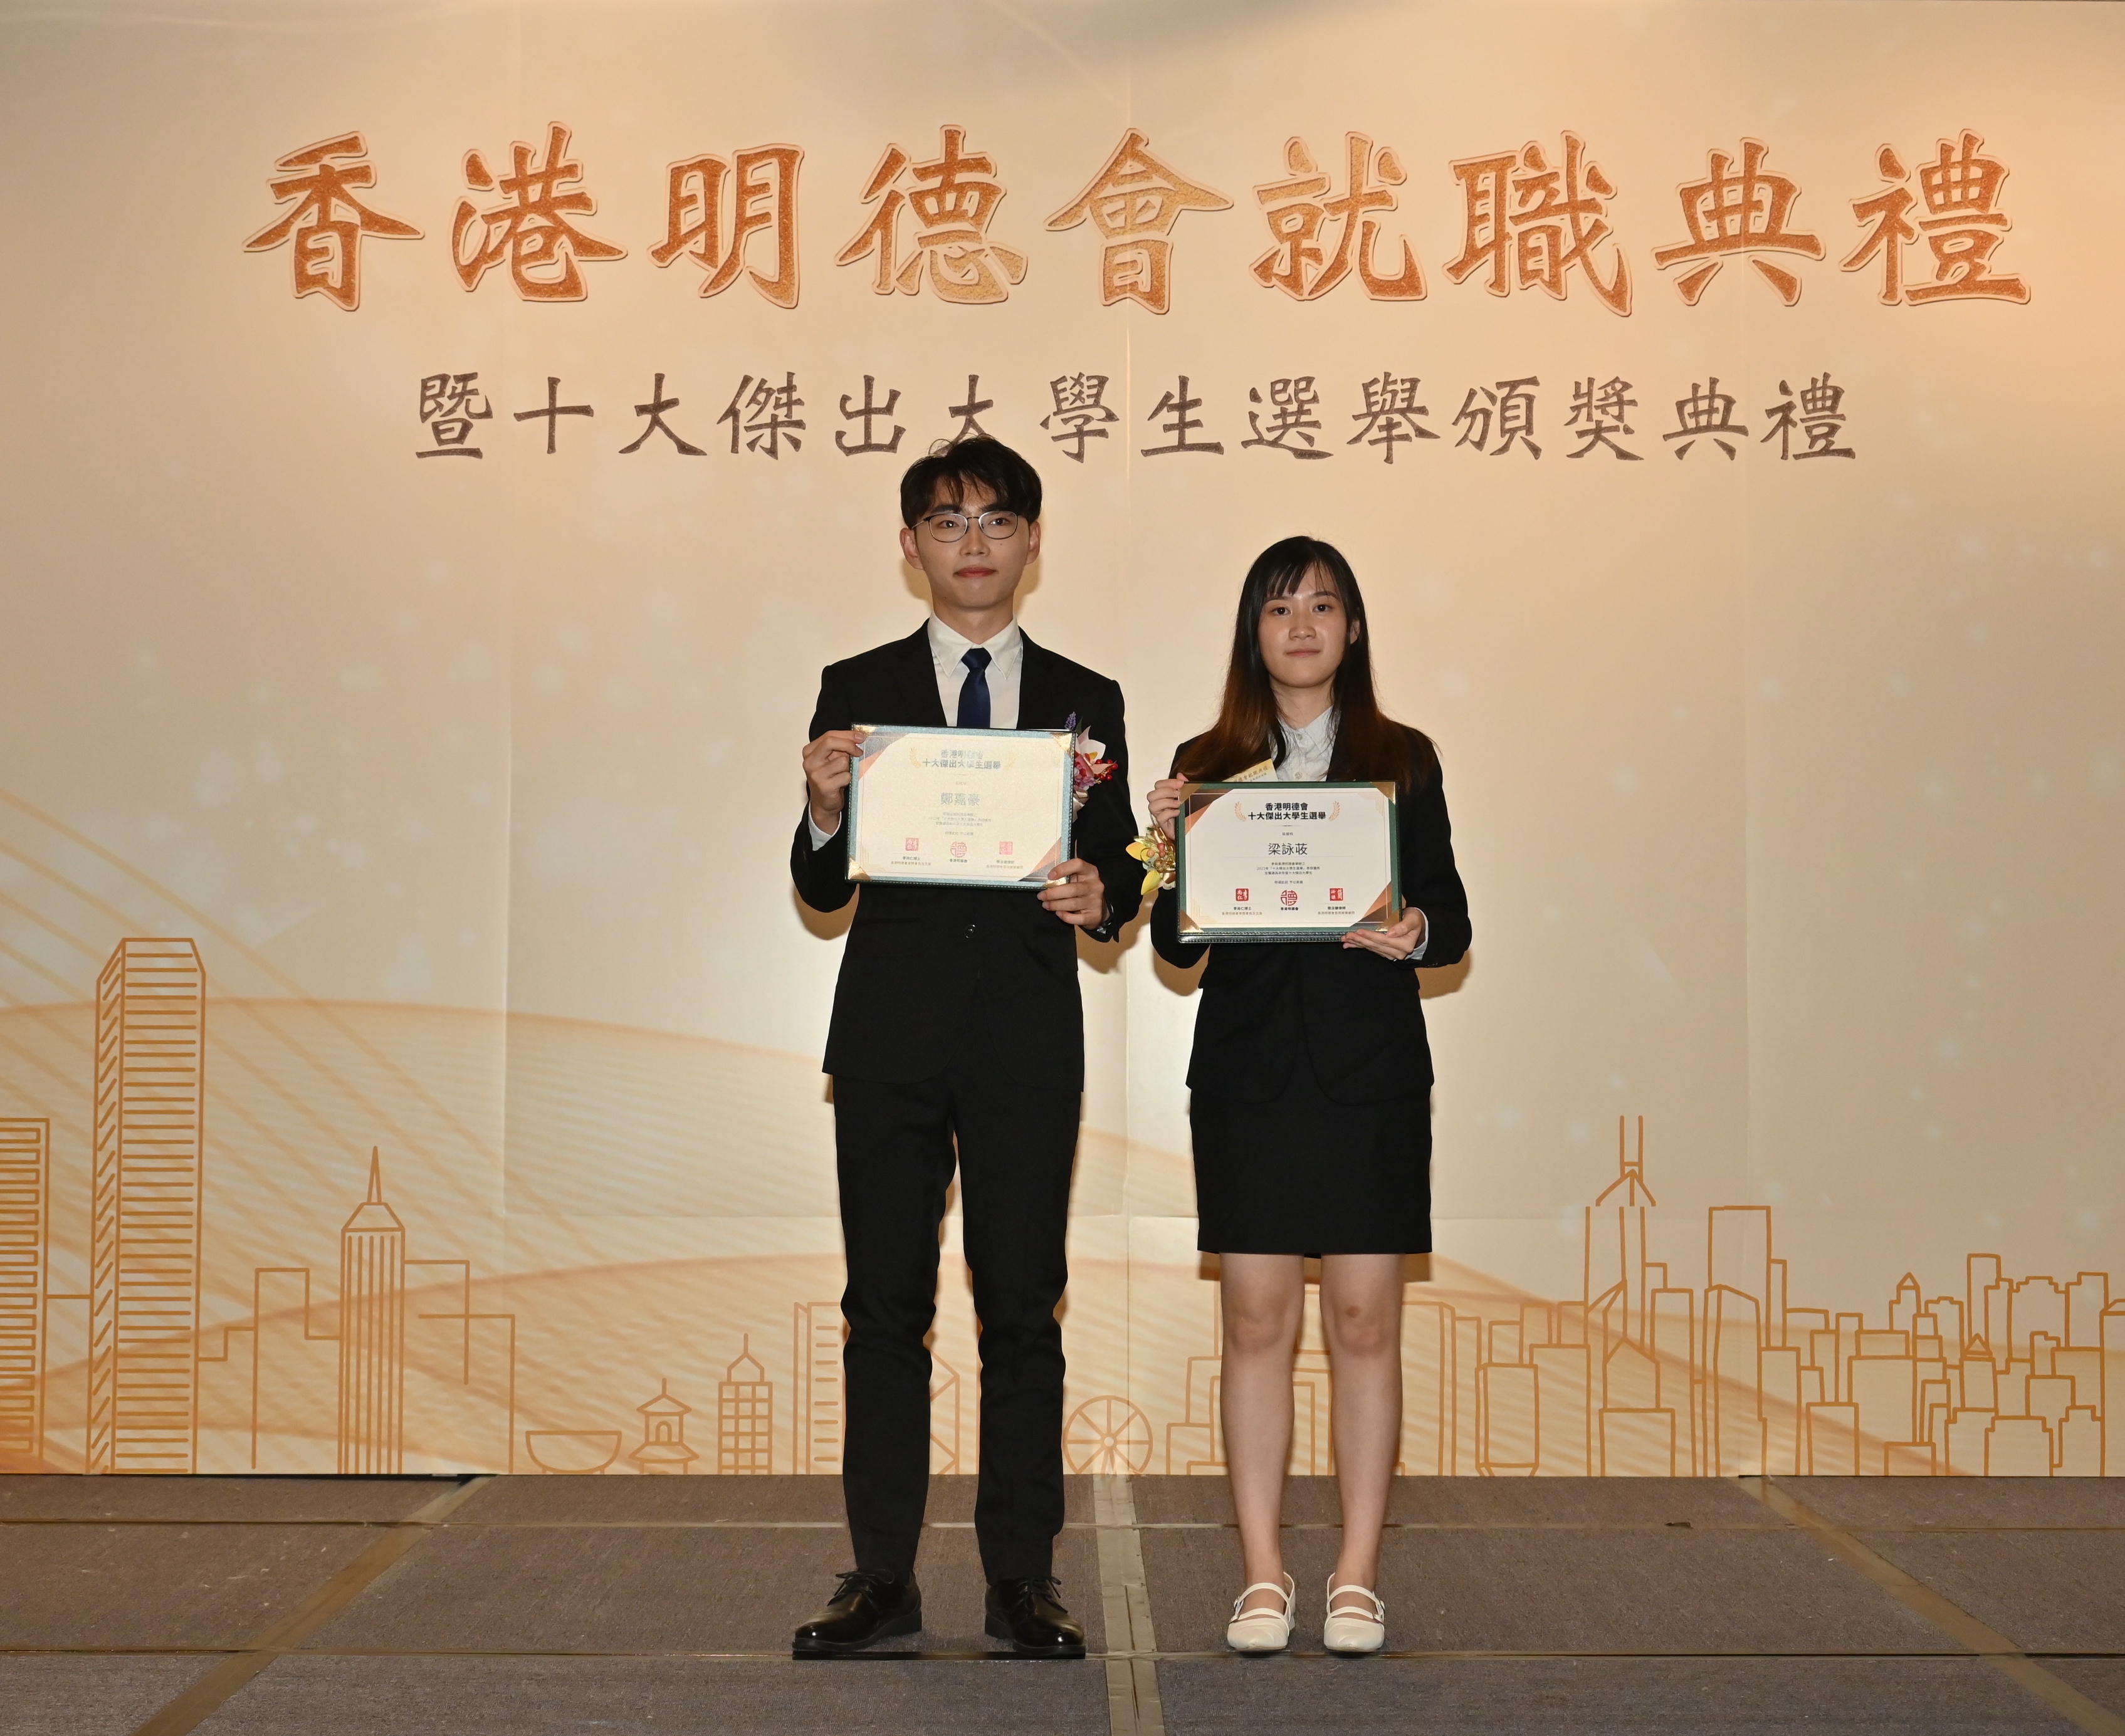 Cheng Ka-ho(left) from the HKUST and Leung Wing-kiu(right) from the CUHK